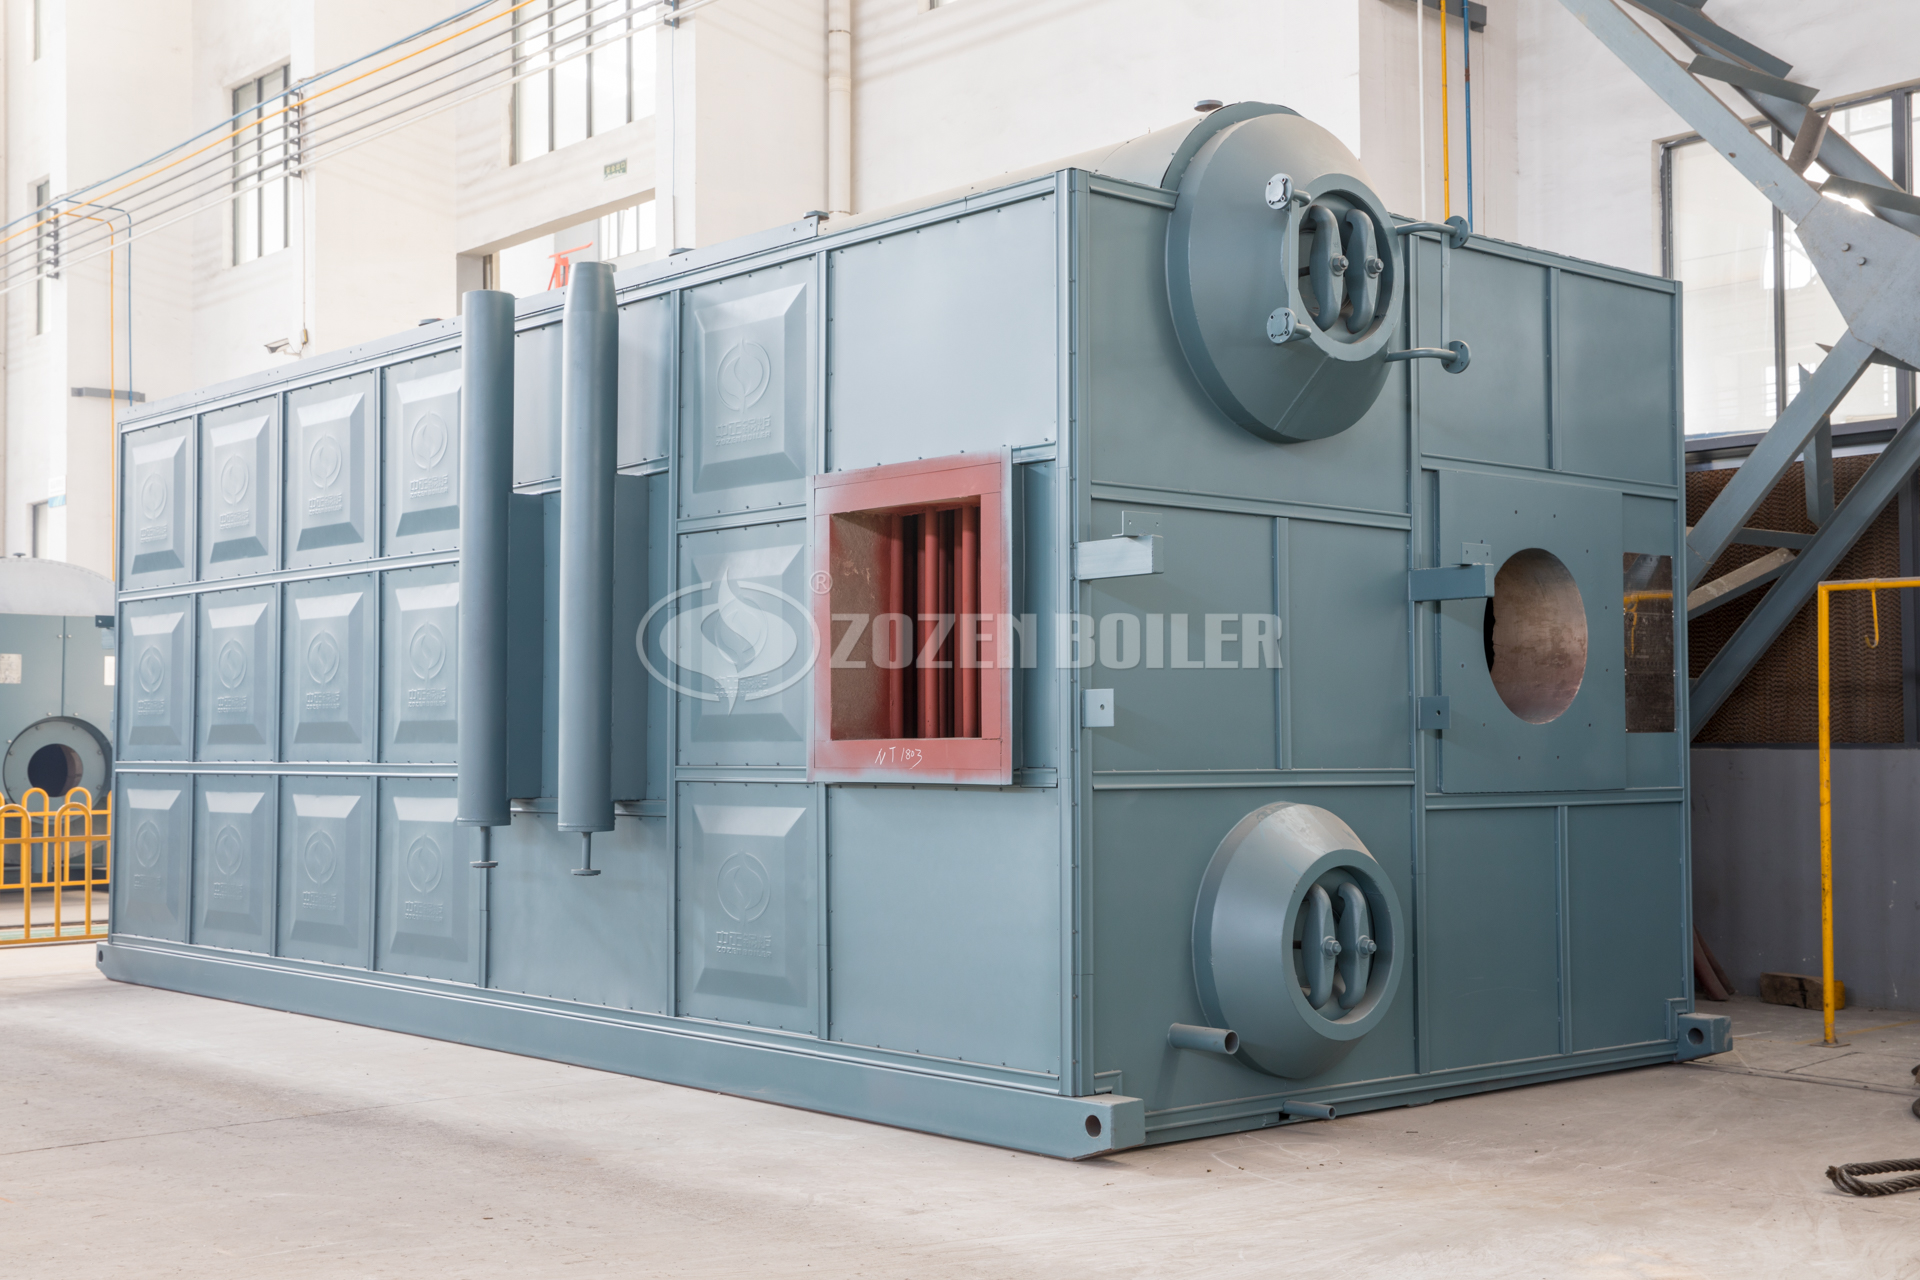 Characteristics and Prospects of Oil-Fired and Gas-Fired  Horizontal Boilers